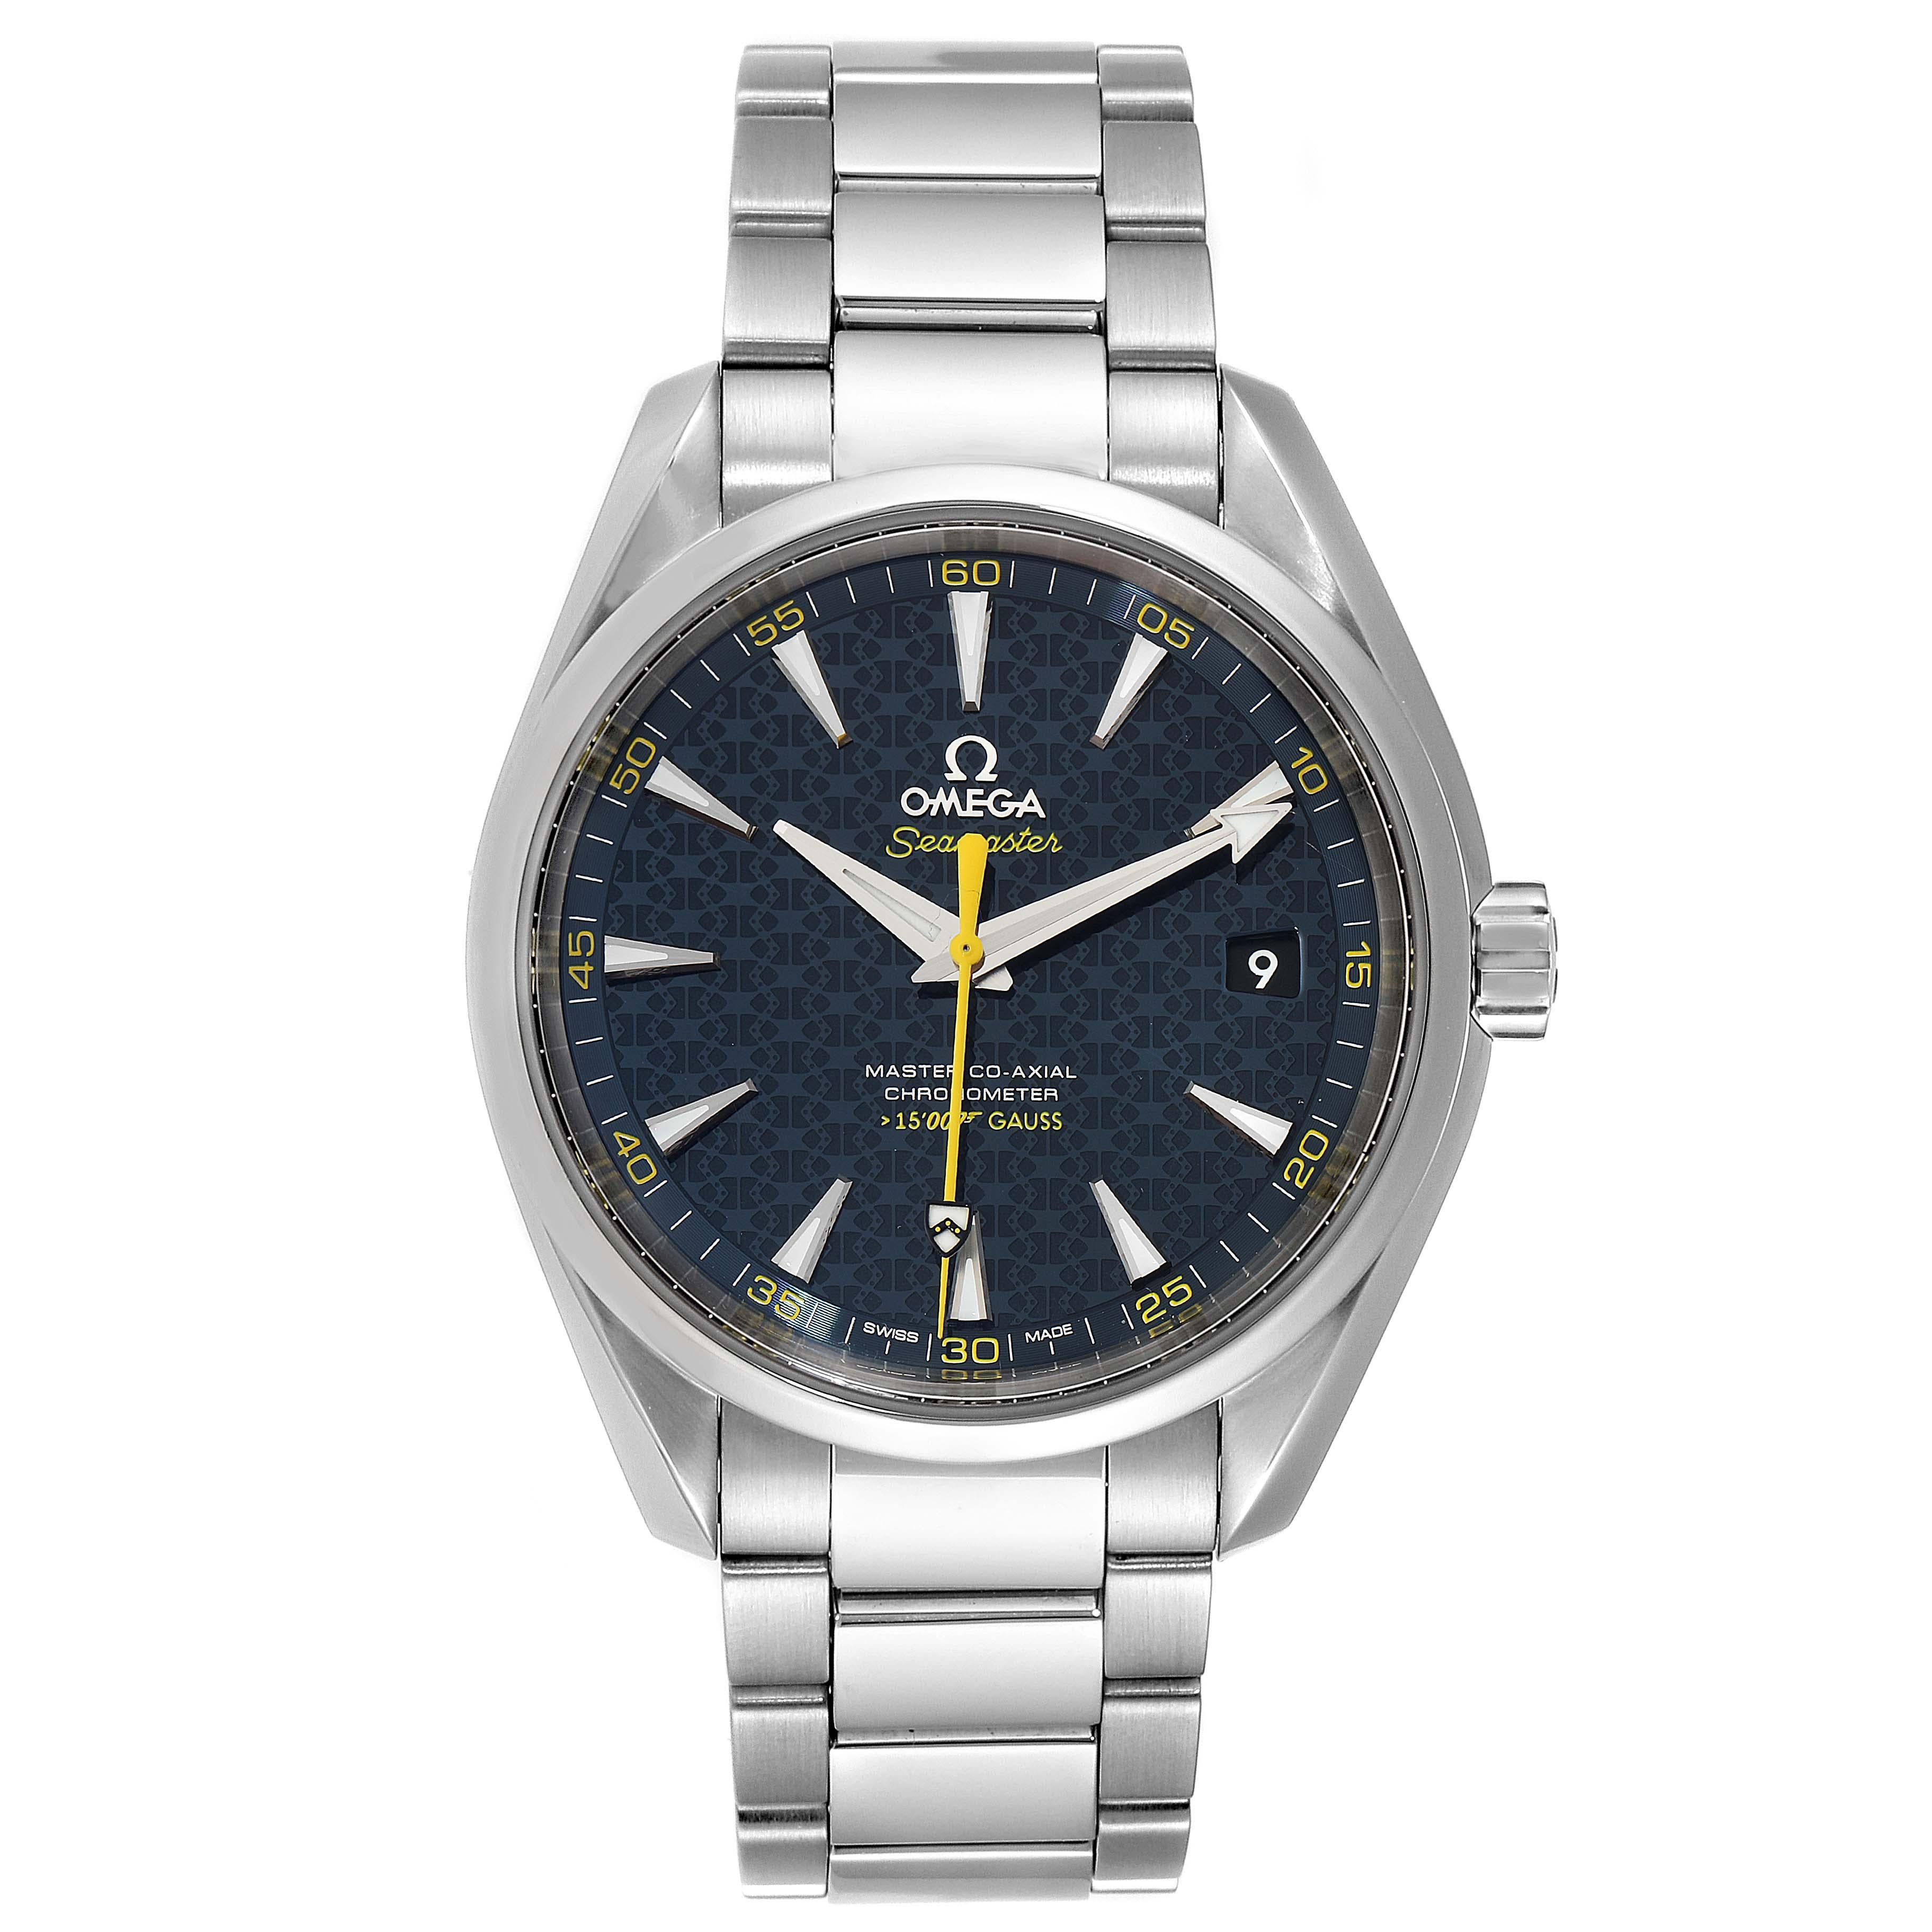 Omega Seamaster Aqua Terra Spectre Bond LE Watch 231.10.42.21.03.004. Automatic self-winding movement. Caliber 8507. Stainless steel round case 41.5 mm in diameter. Transparent case back. The movement's oscillating weight is skeletonized and has